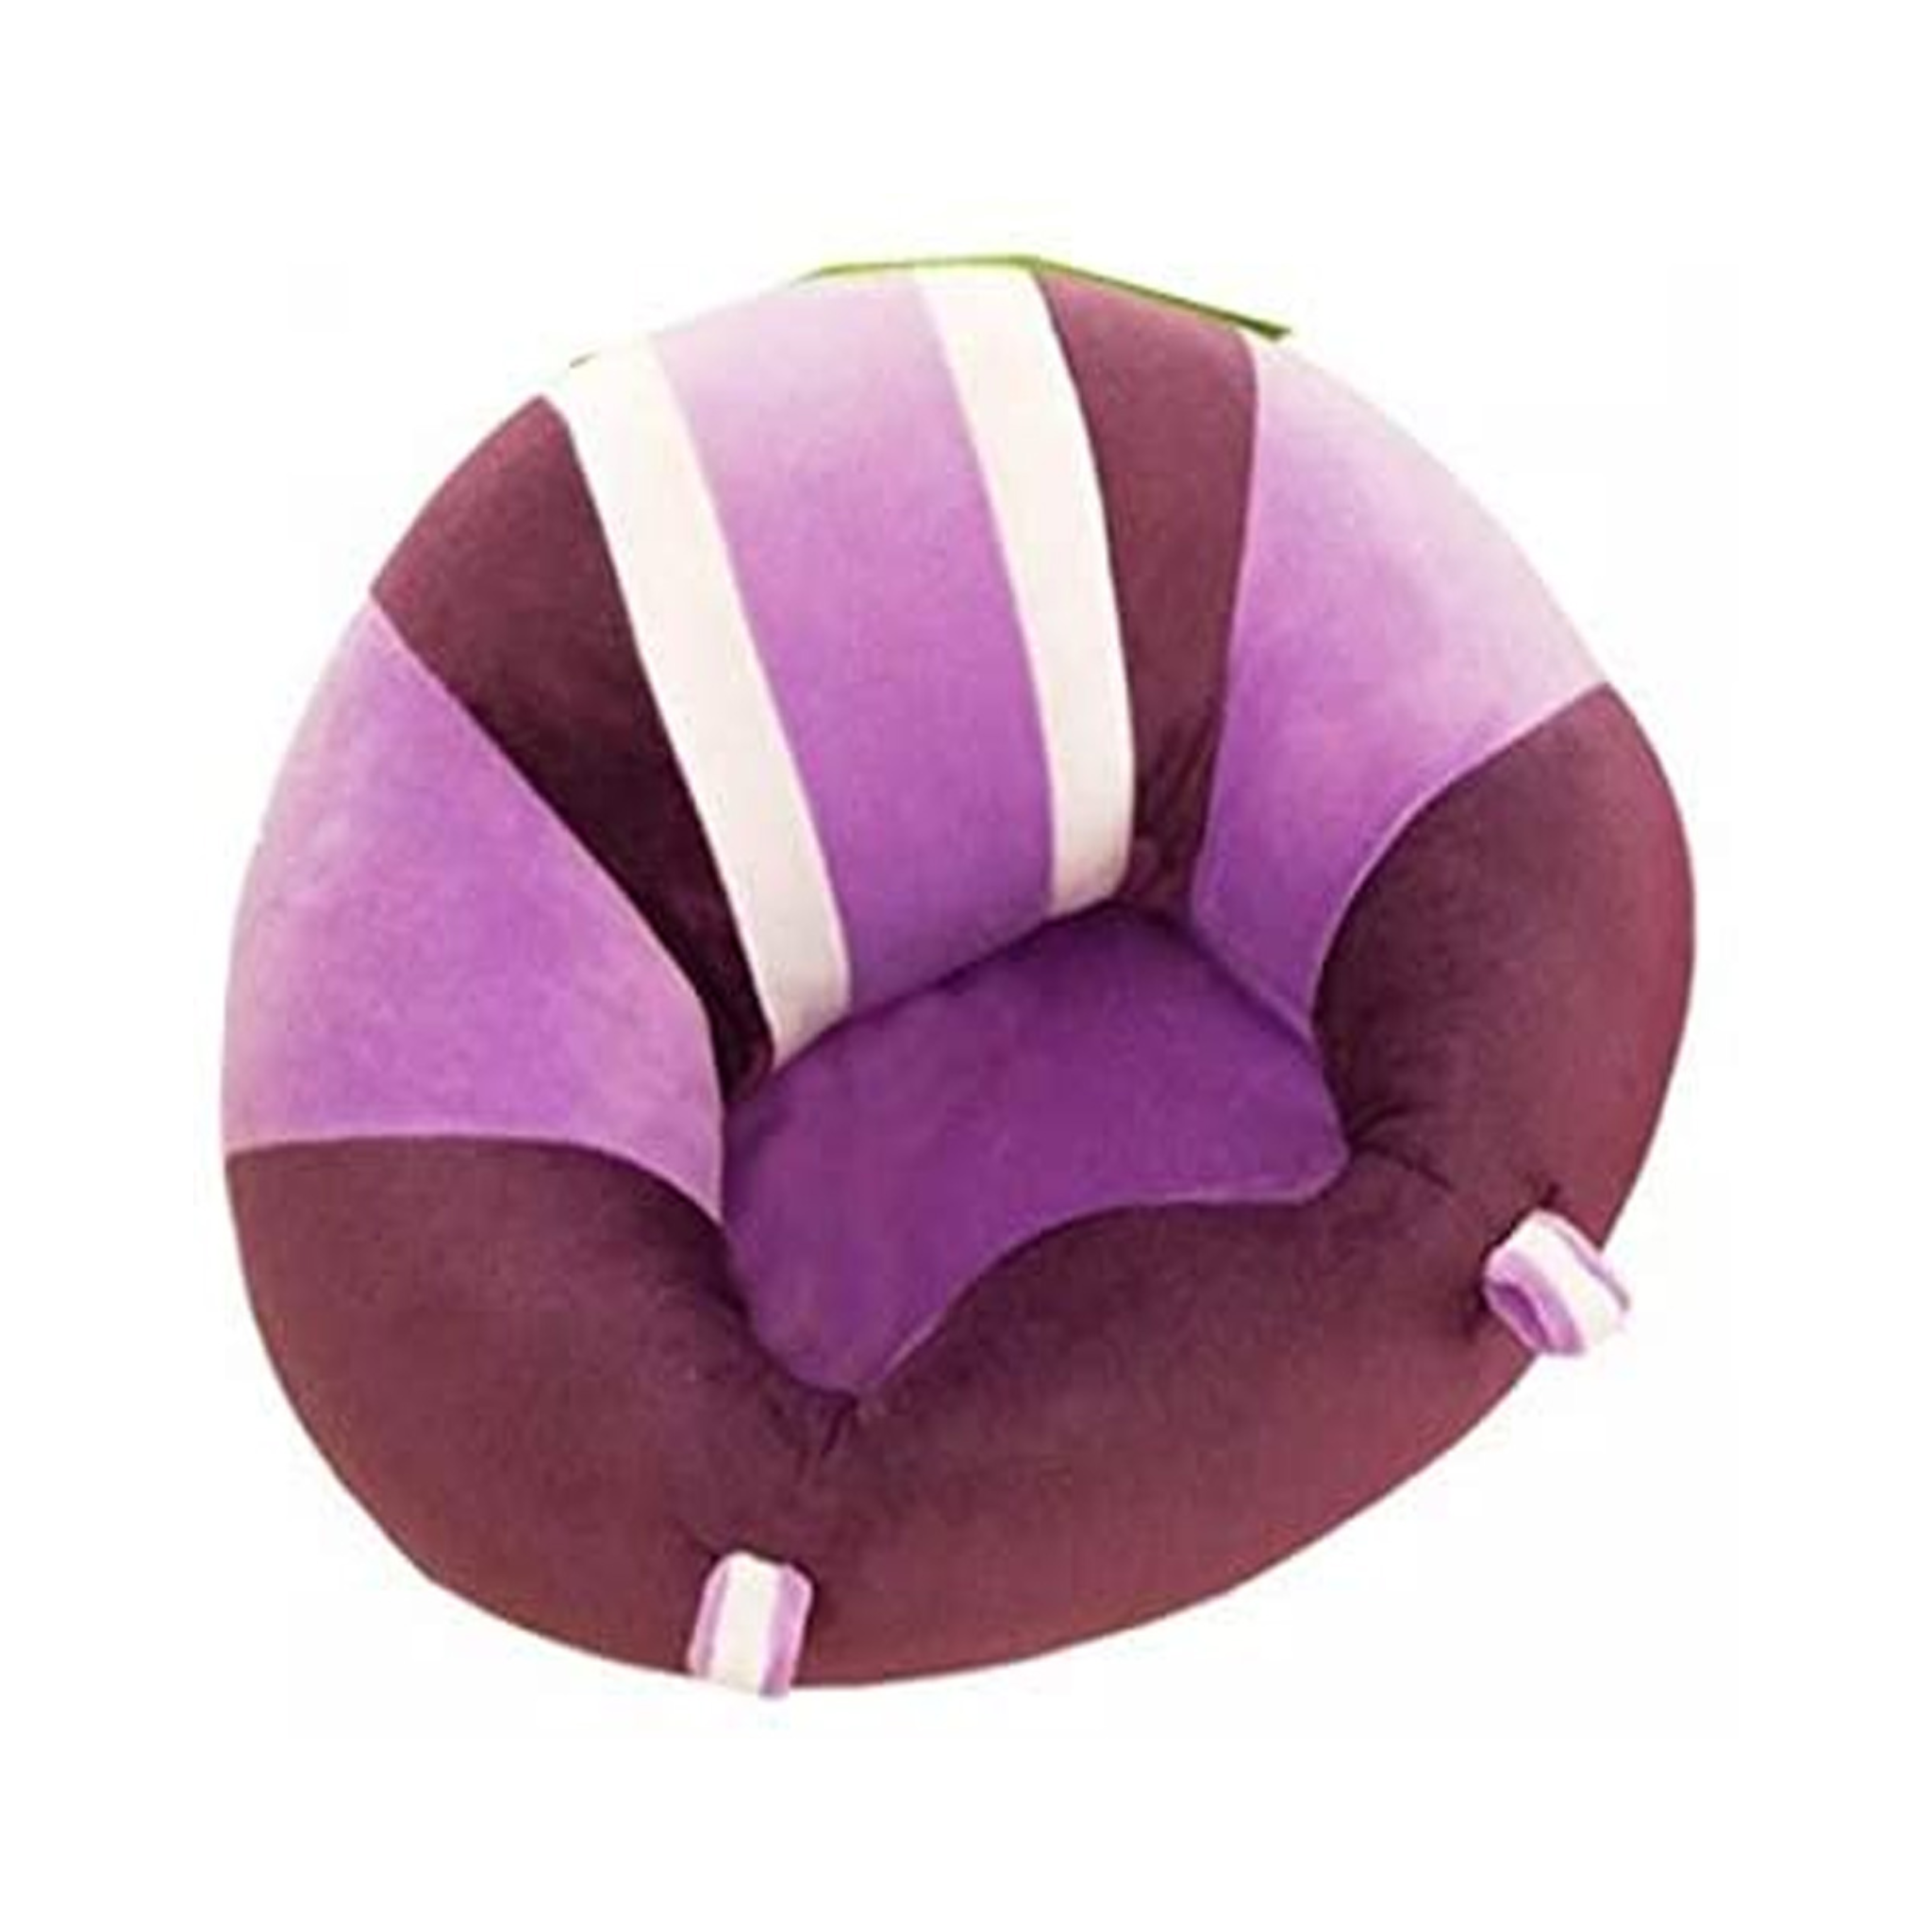 Cushions, Baby Support Seat, in Multi-Colors